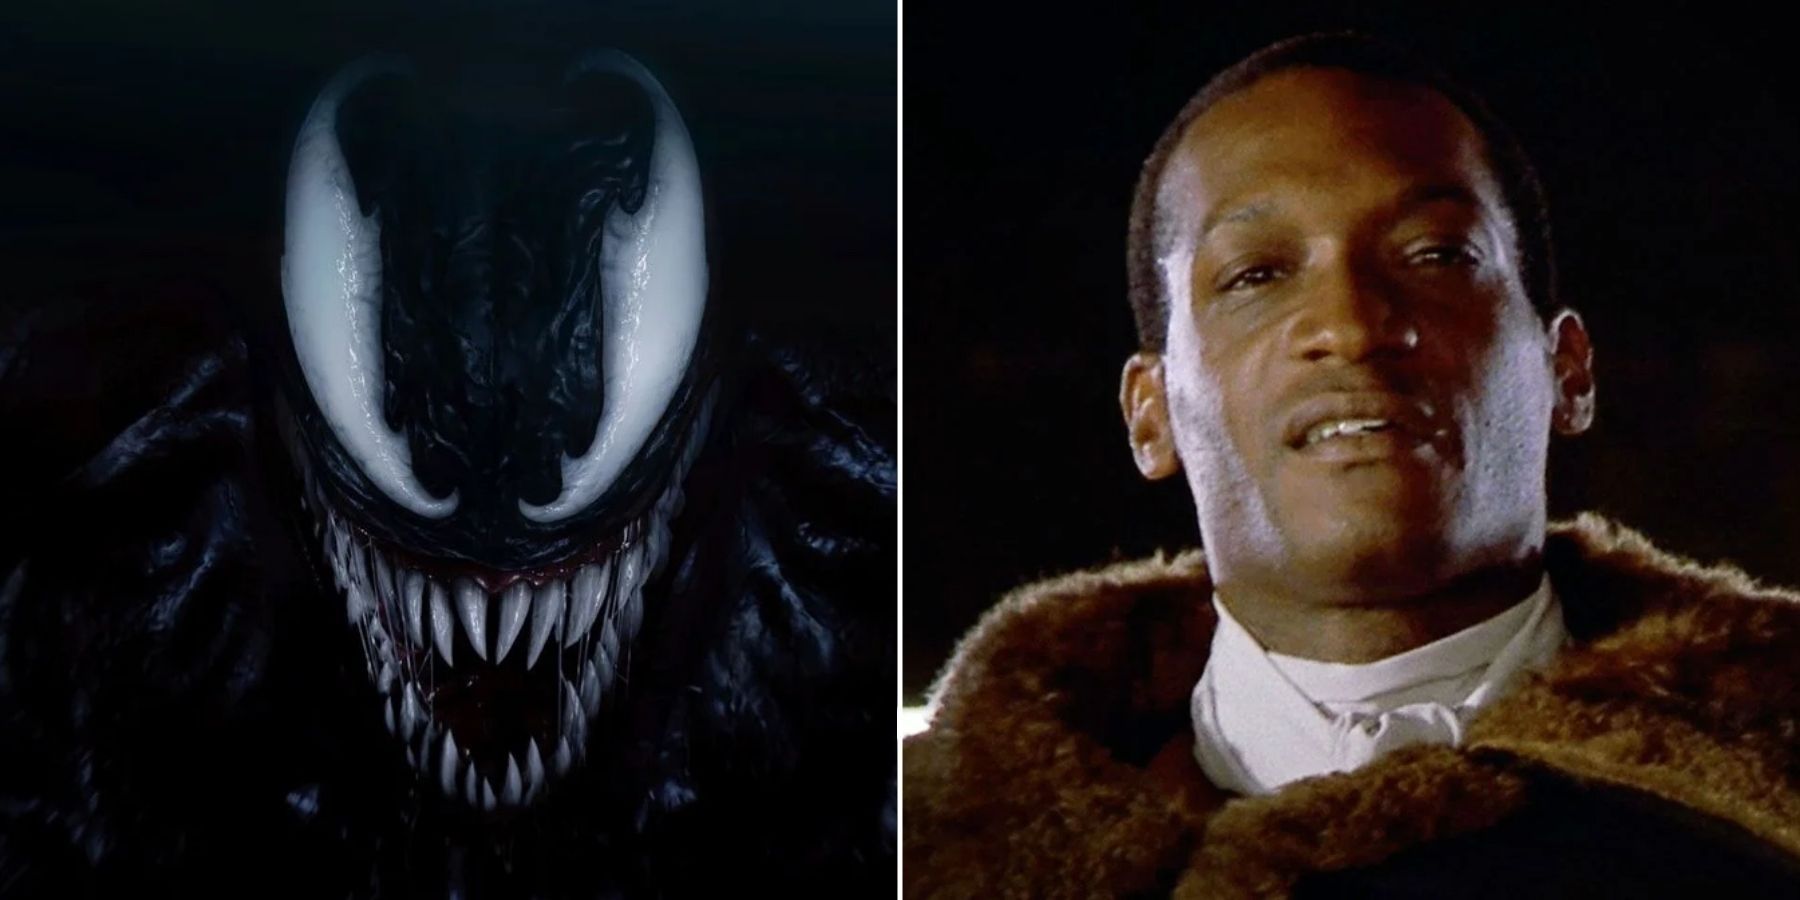 According to the voice actor for Venom in the game, Tony Todd (who we heard  briefly in the game's reveal trailer), Marvel's Spider-Man 2…